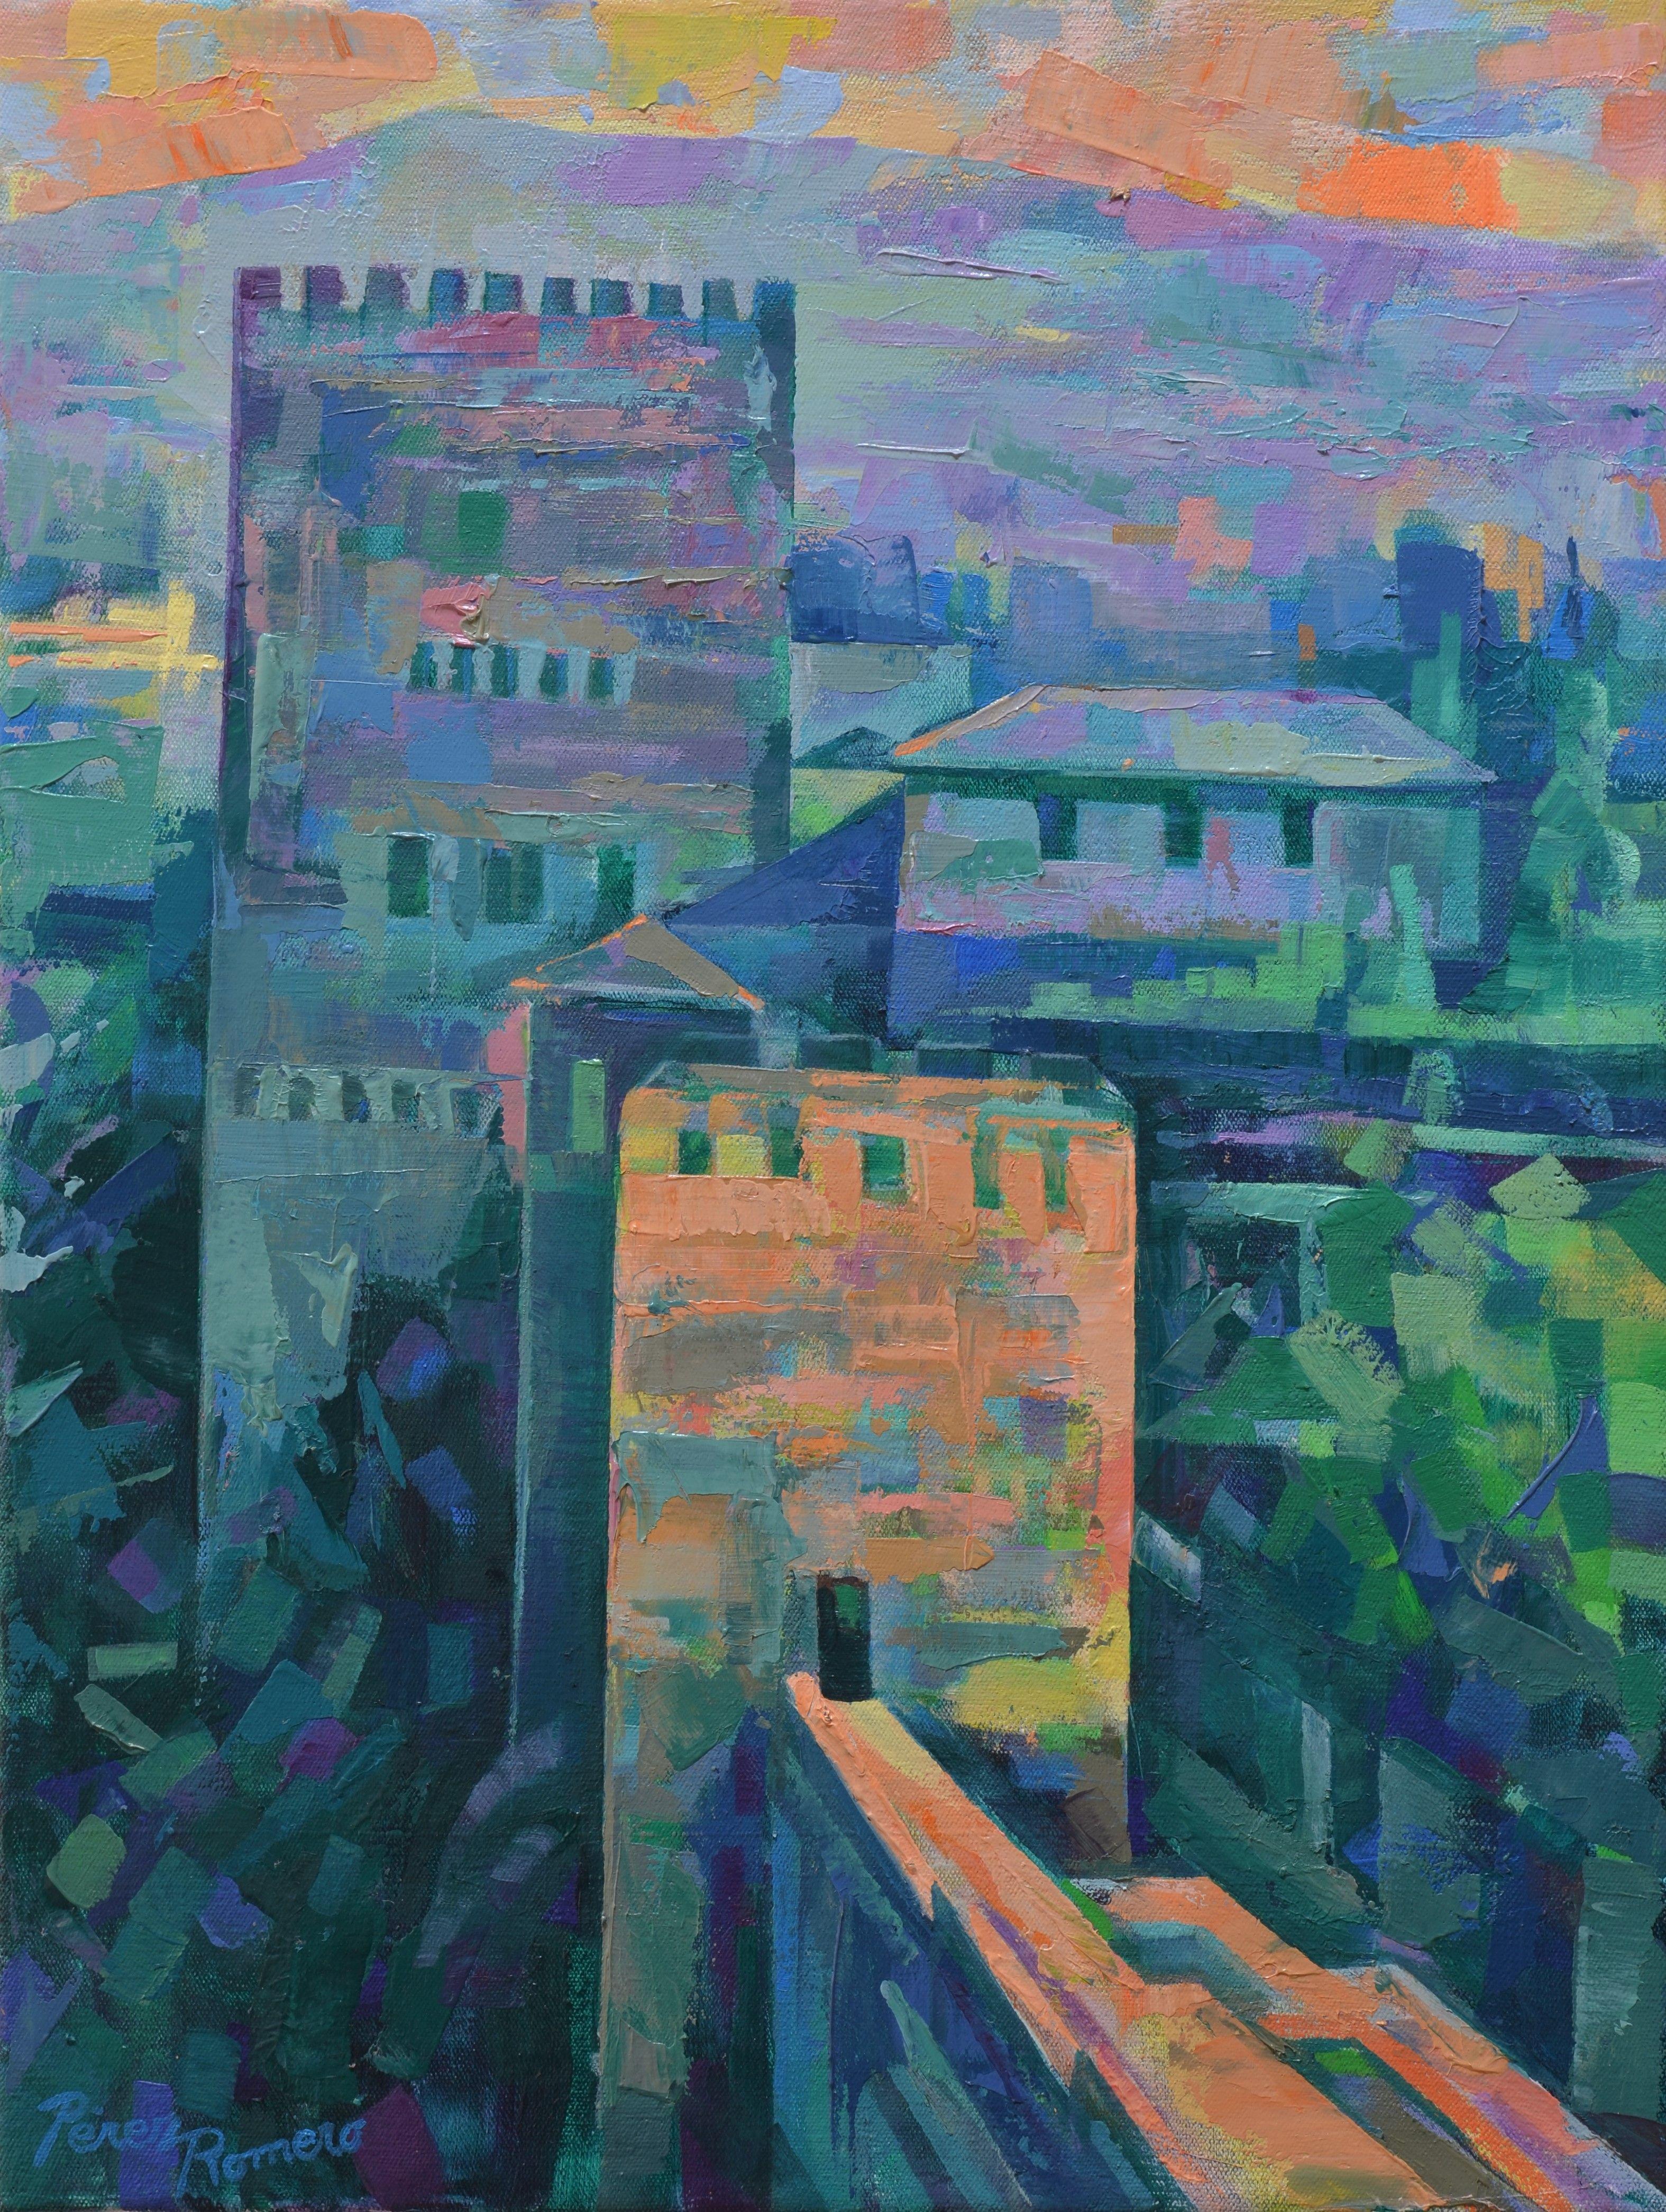 This is a view of the Comares Tower and the exterior of other buildings from the Alcazaba. The Comares Tower is a Tower-Palace, one of the most beautiful and imposing of the Alhambra, full of legends and stories. It is possible to appreciate, thanks